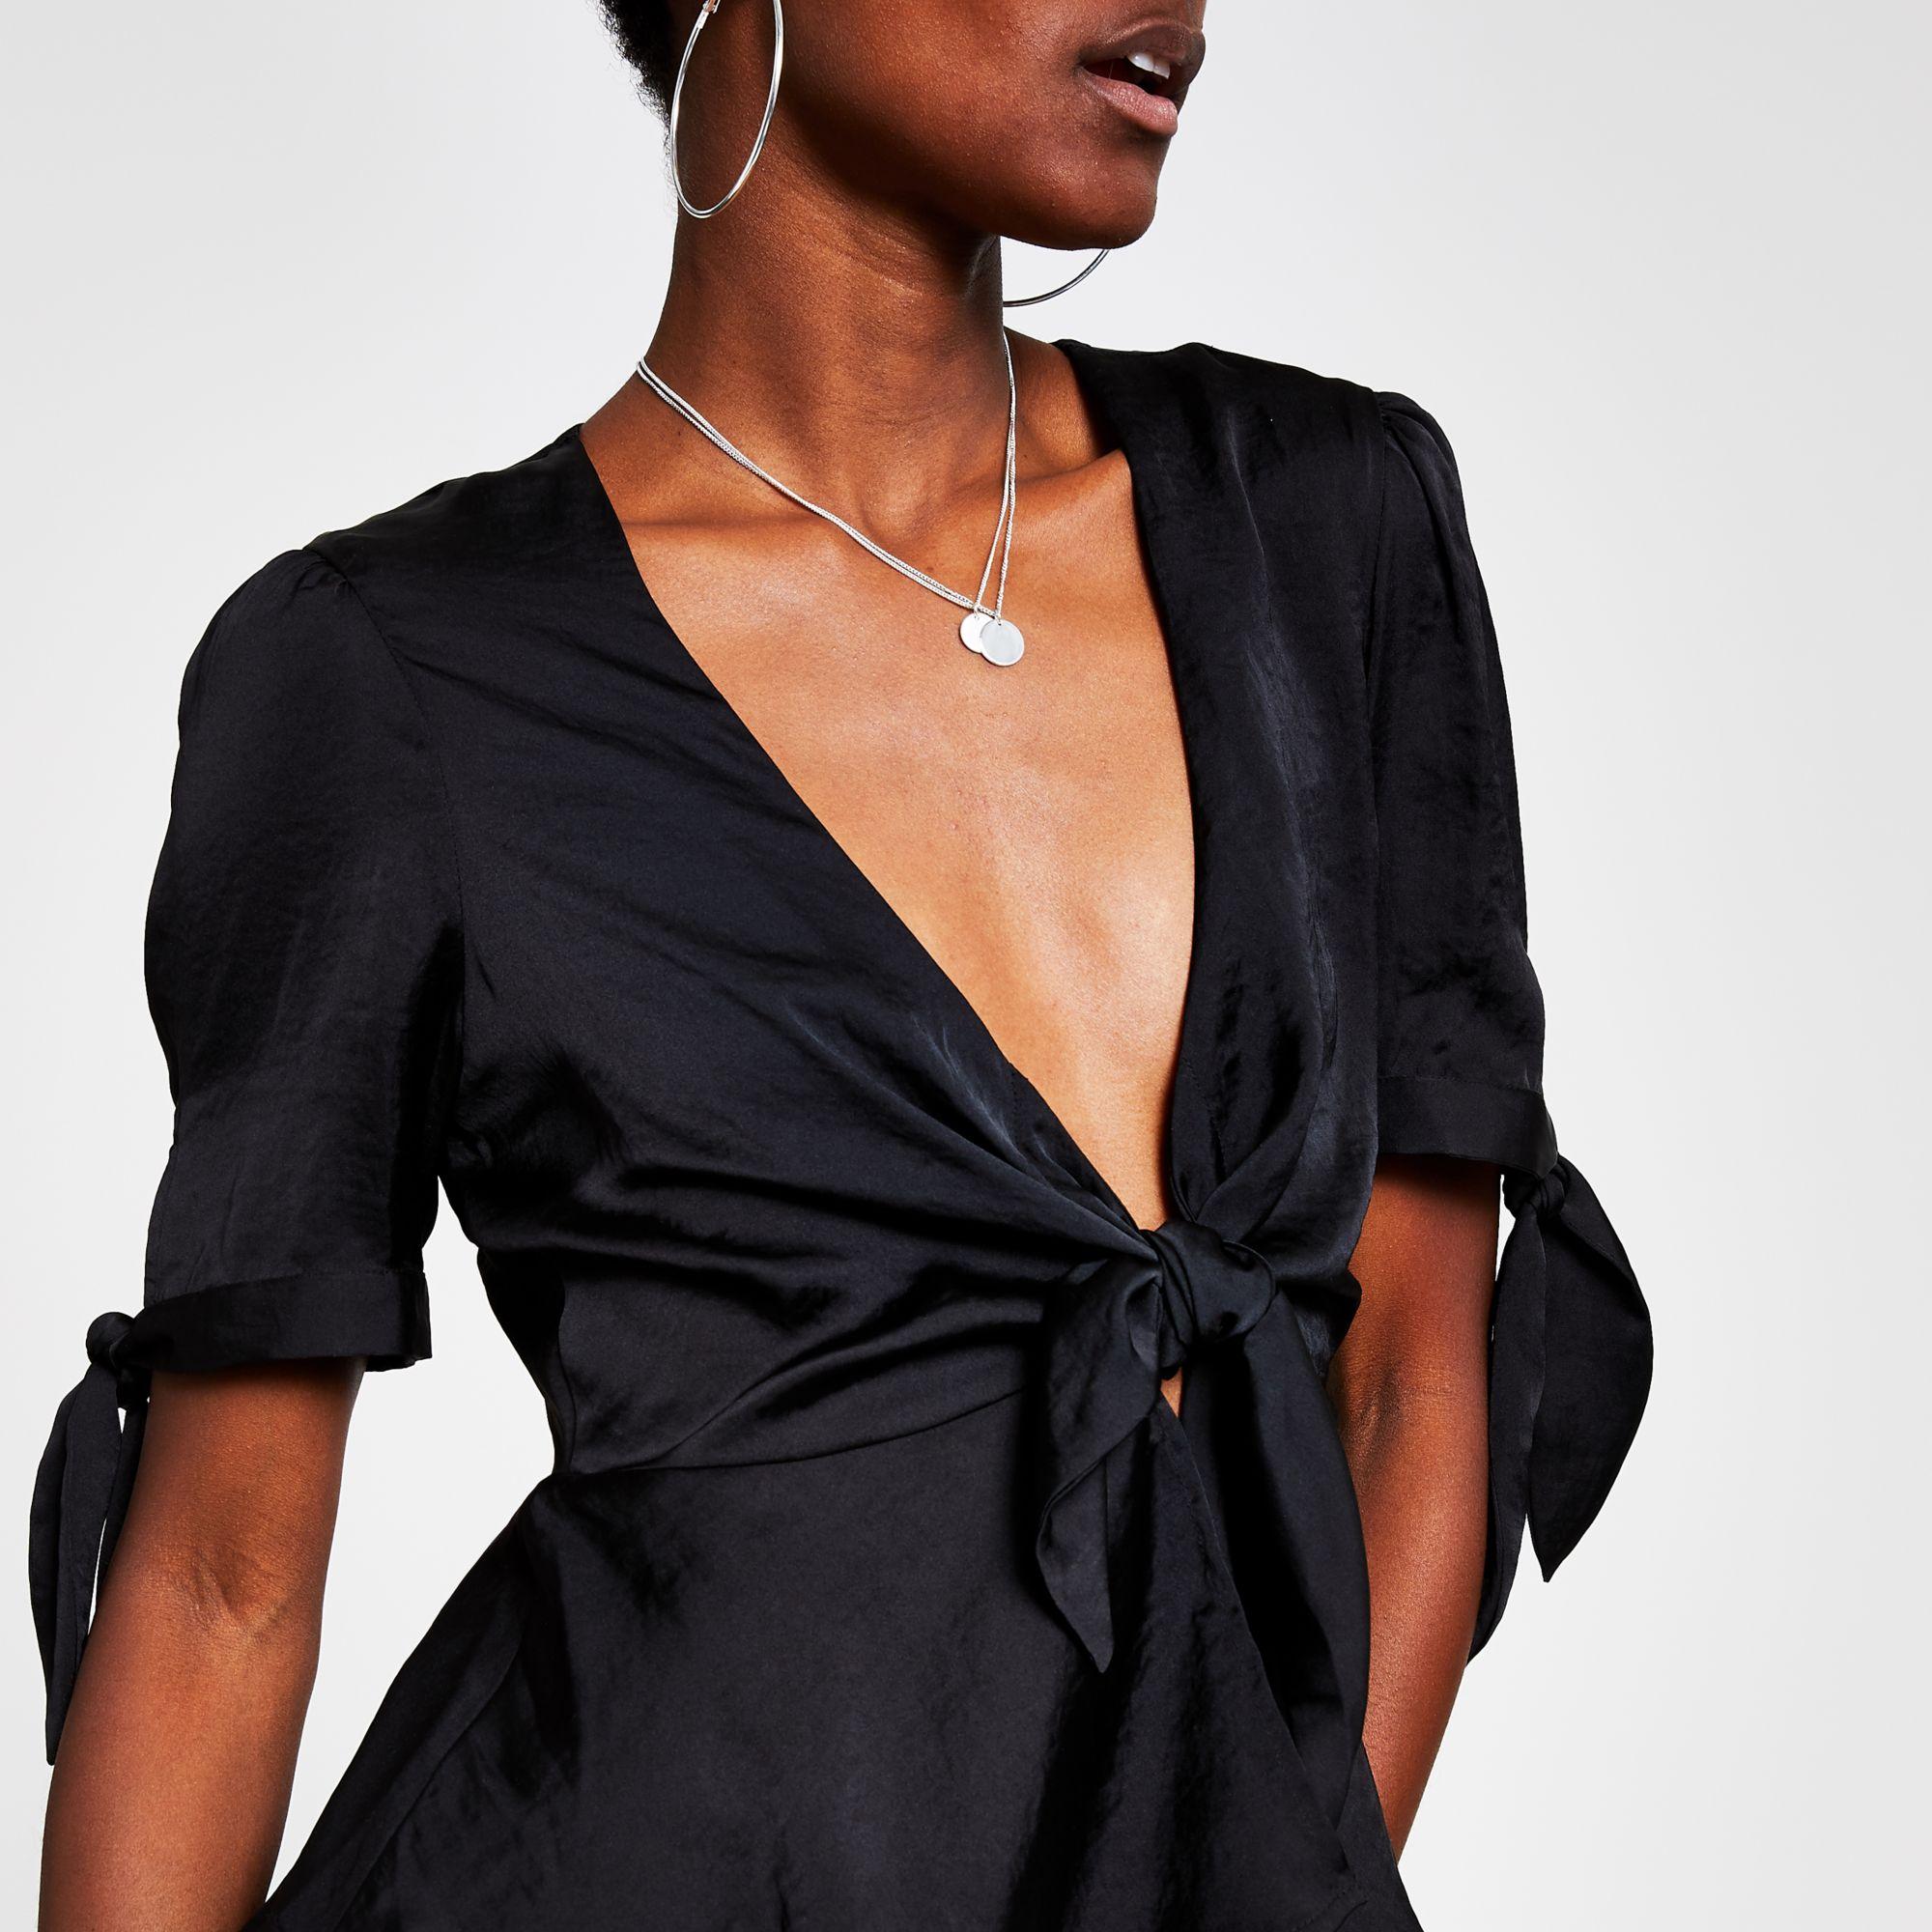 River Island Satin Bow Front Top in Black - Lyst